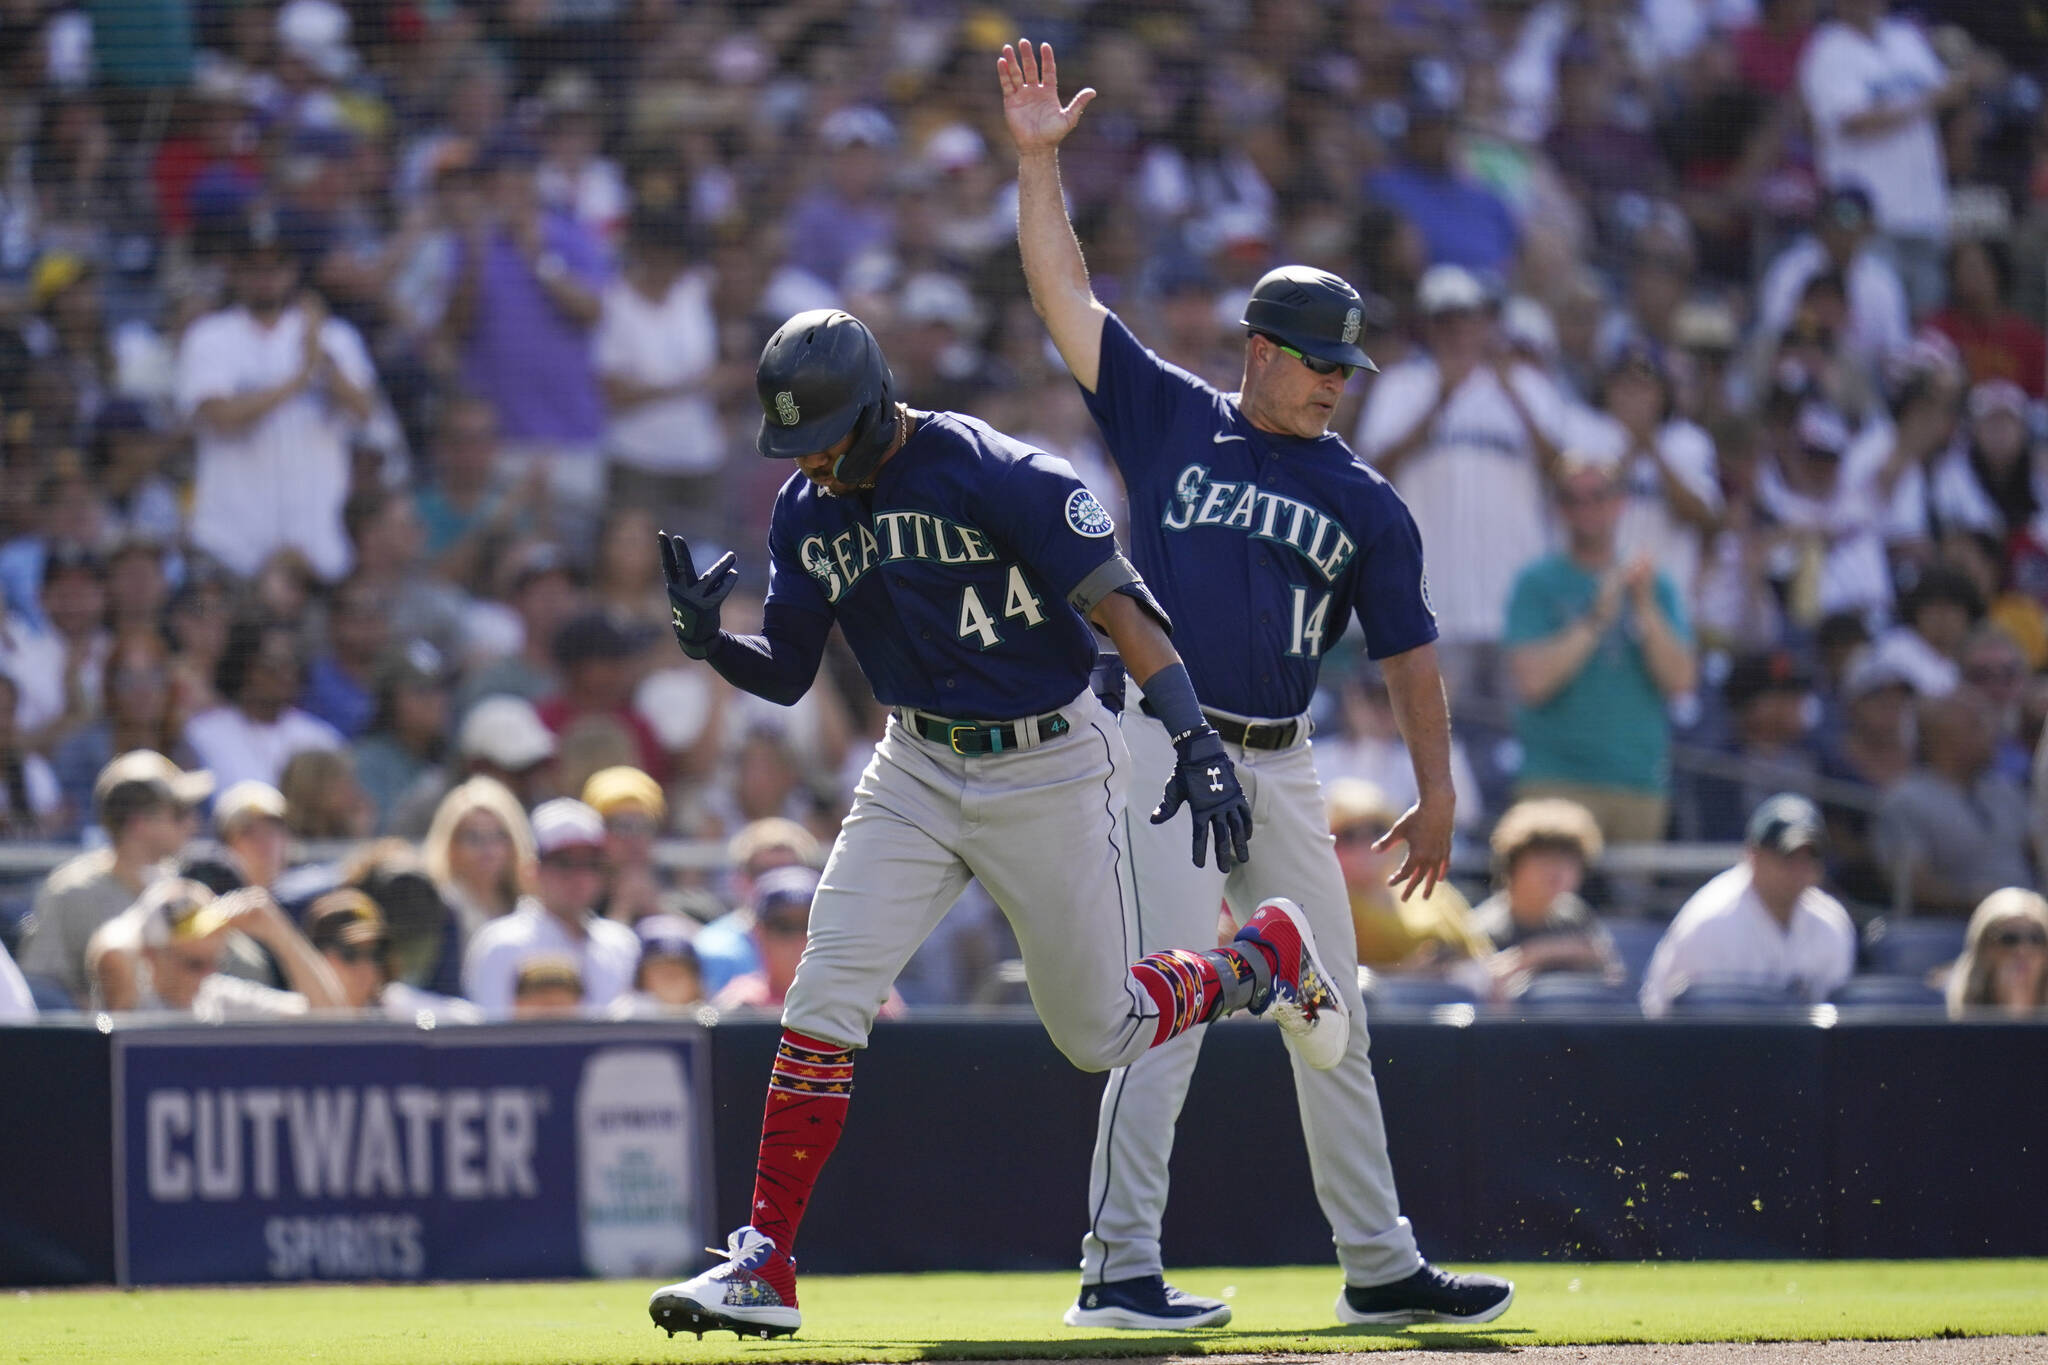 The Seattle Mariners’ Julio Rodriguez, left, reacts with third base coach Manny Acta after hitting a two-run home run during the fourth inning of a baseball game against the San Diego Padres on Monday in San Diego. (Gregory Bull/The Associated Press)